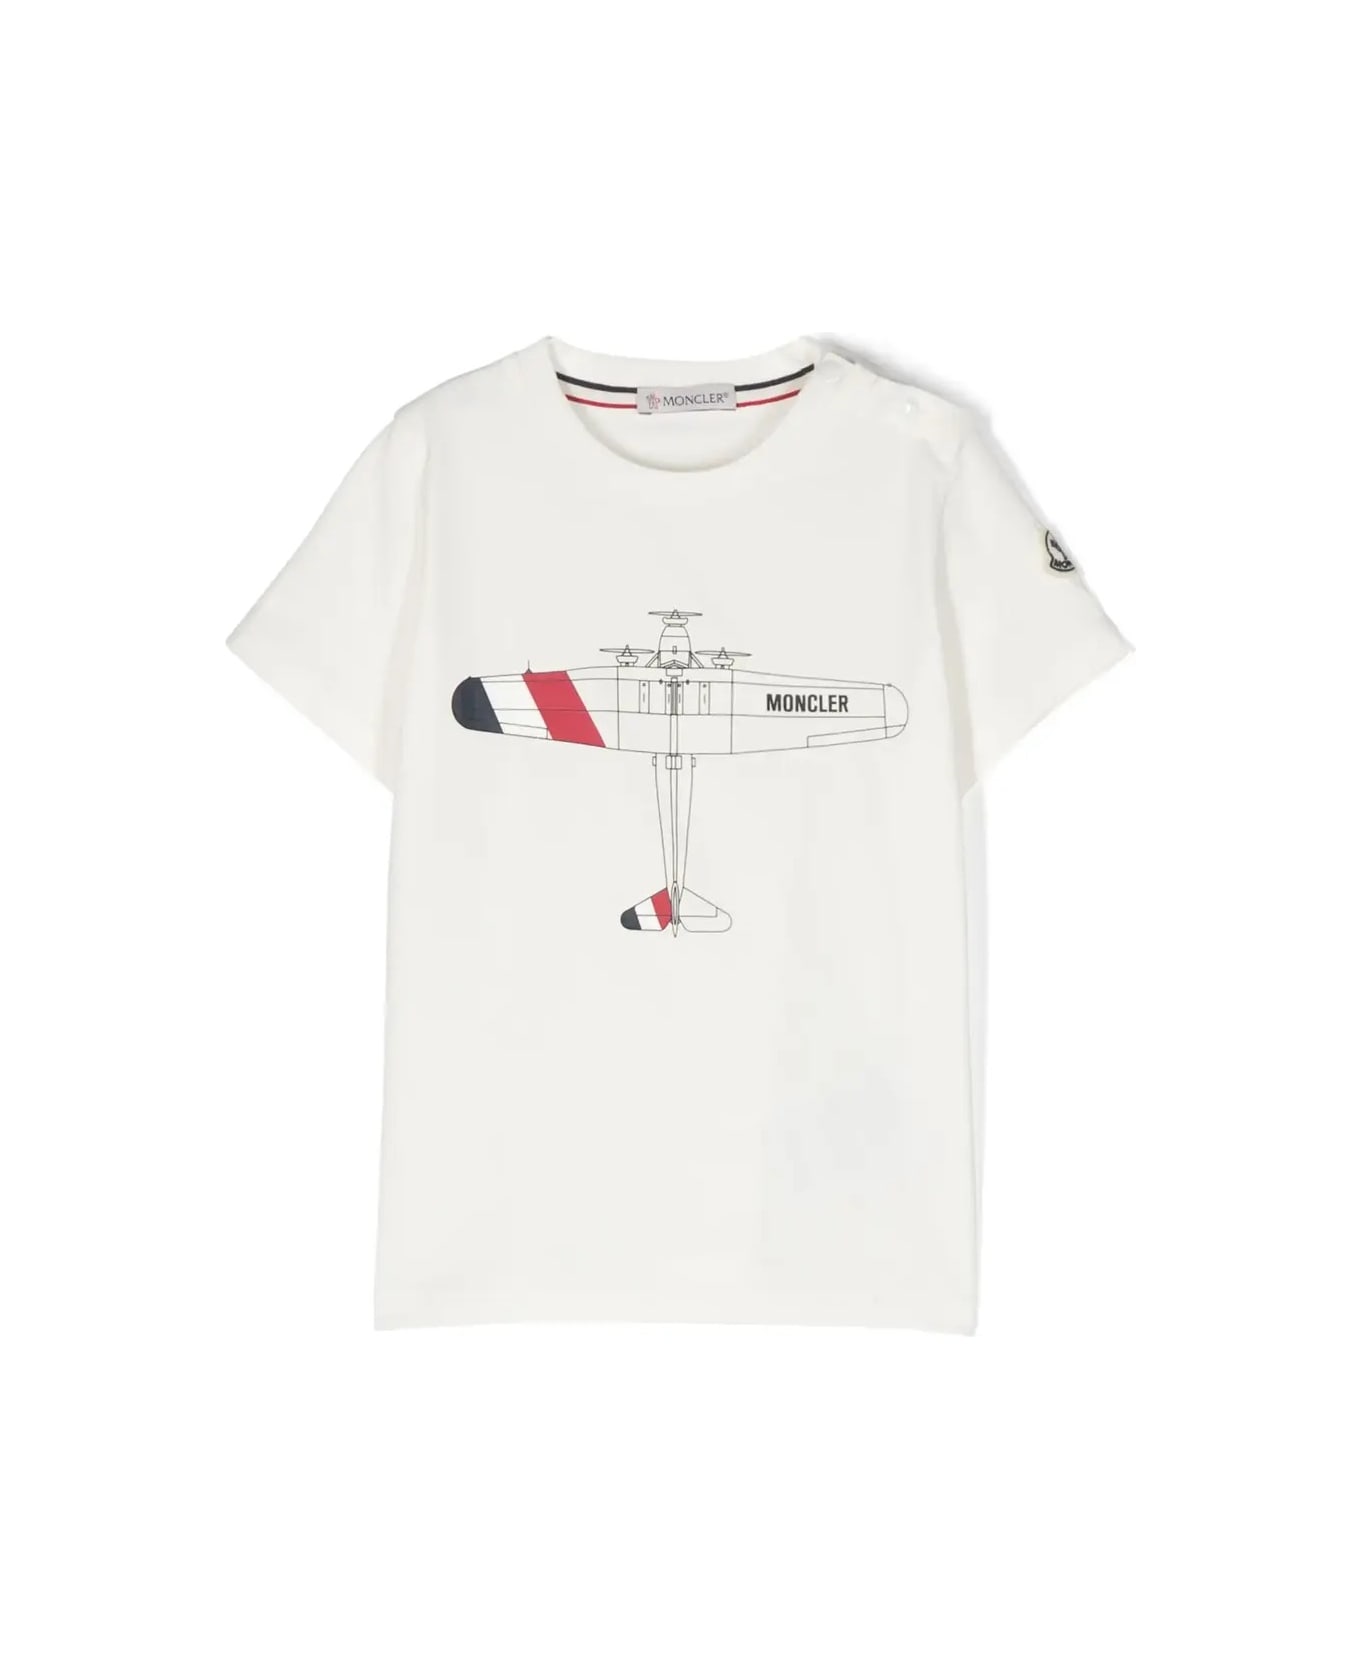 Moncler White T-shirt With Teddy Bear Patch - White